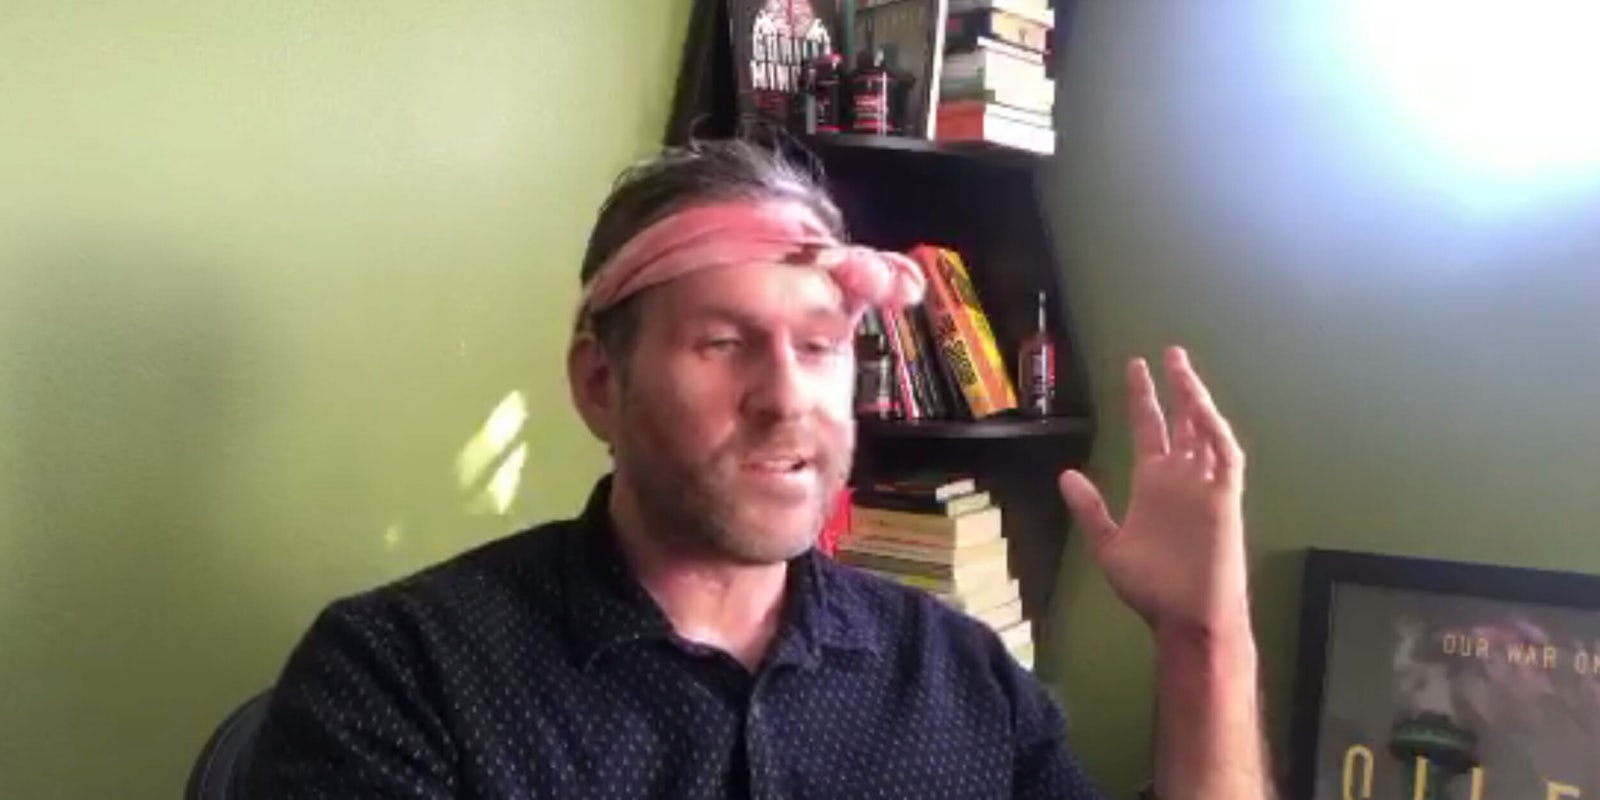 Right-wing provocateur Mike Cernovich hosted a Reddit Ask Me Anything (AMA) on Friday. It went about as well as you'd expect.